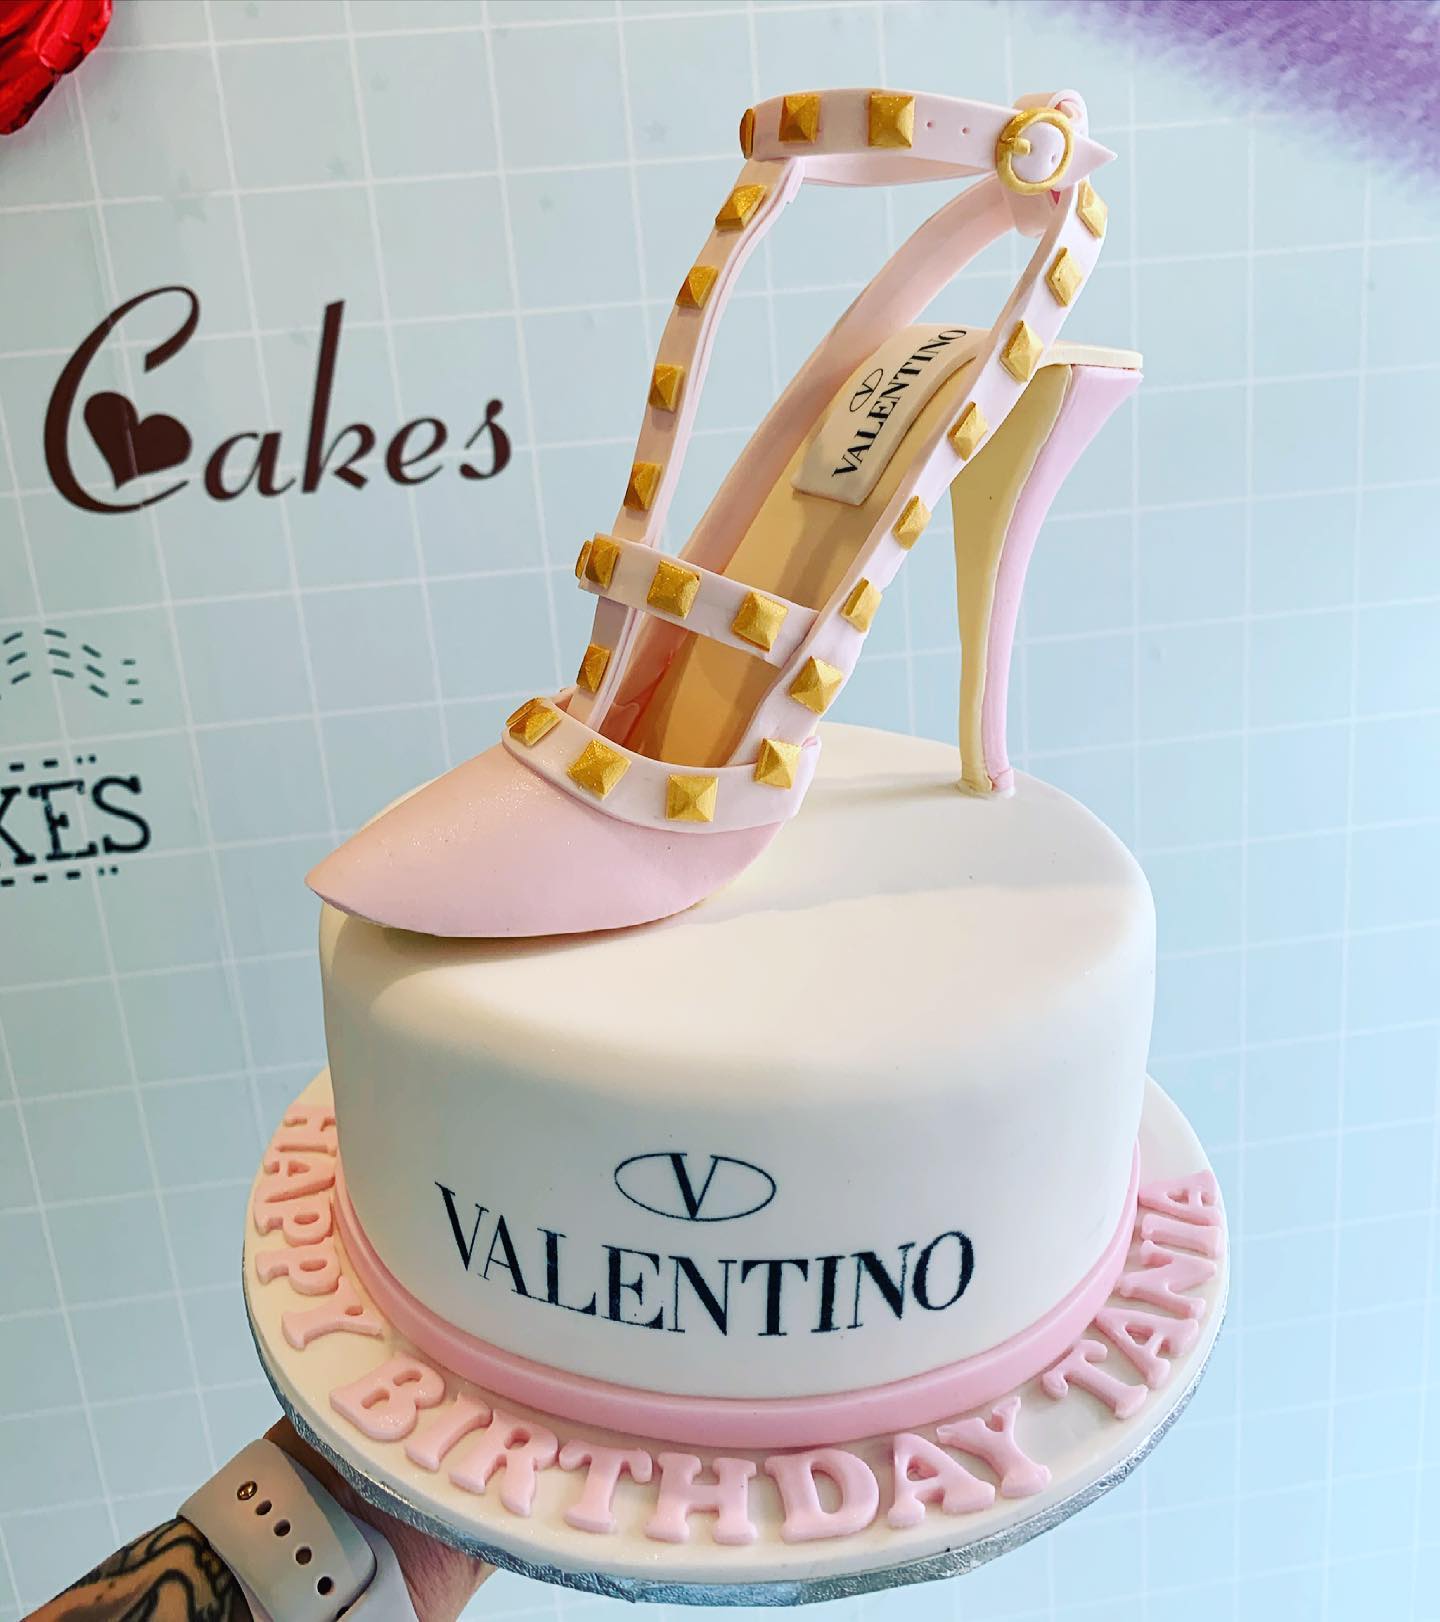 One of my favorite bridal shower cake designs is definitely this high heel  shoe cake. 👰🏼.And the best part is it's all ed… | Shower cakes, Shoe cake,  Cake designs